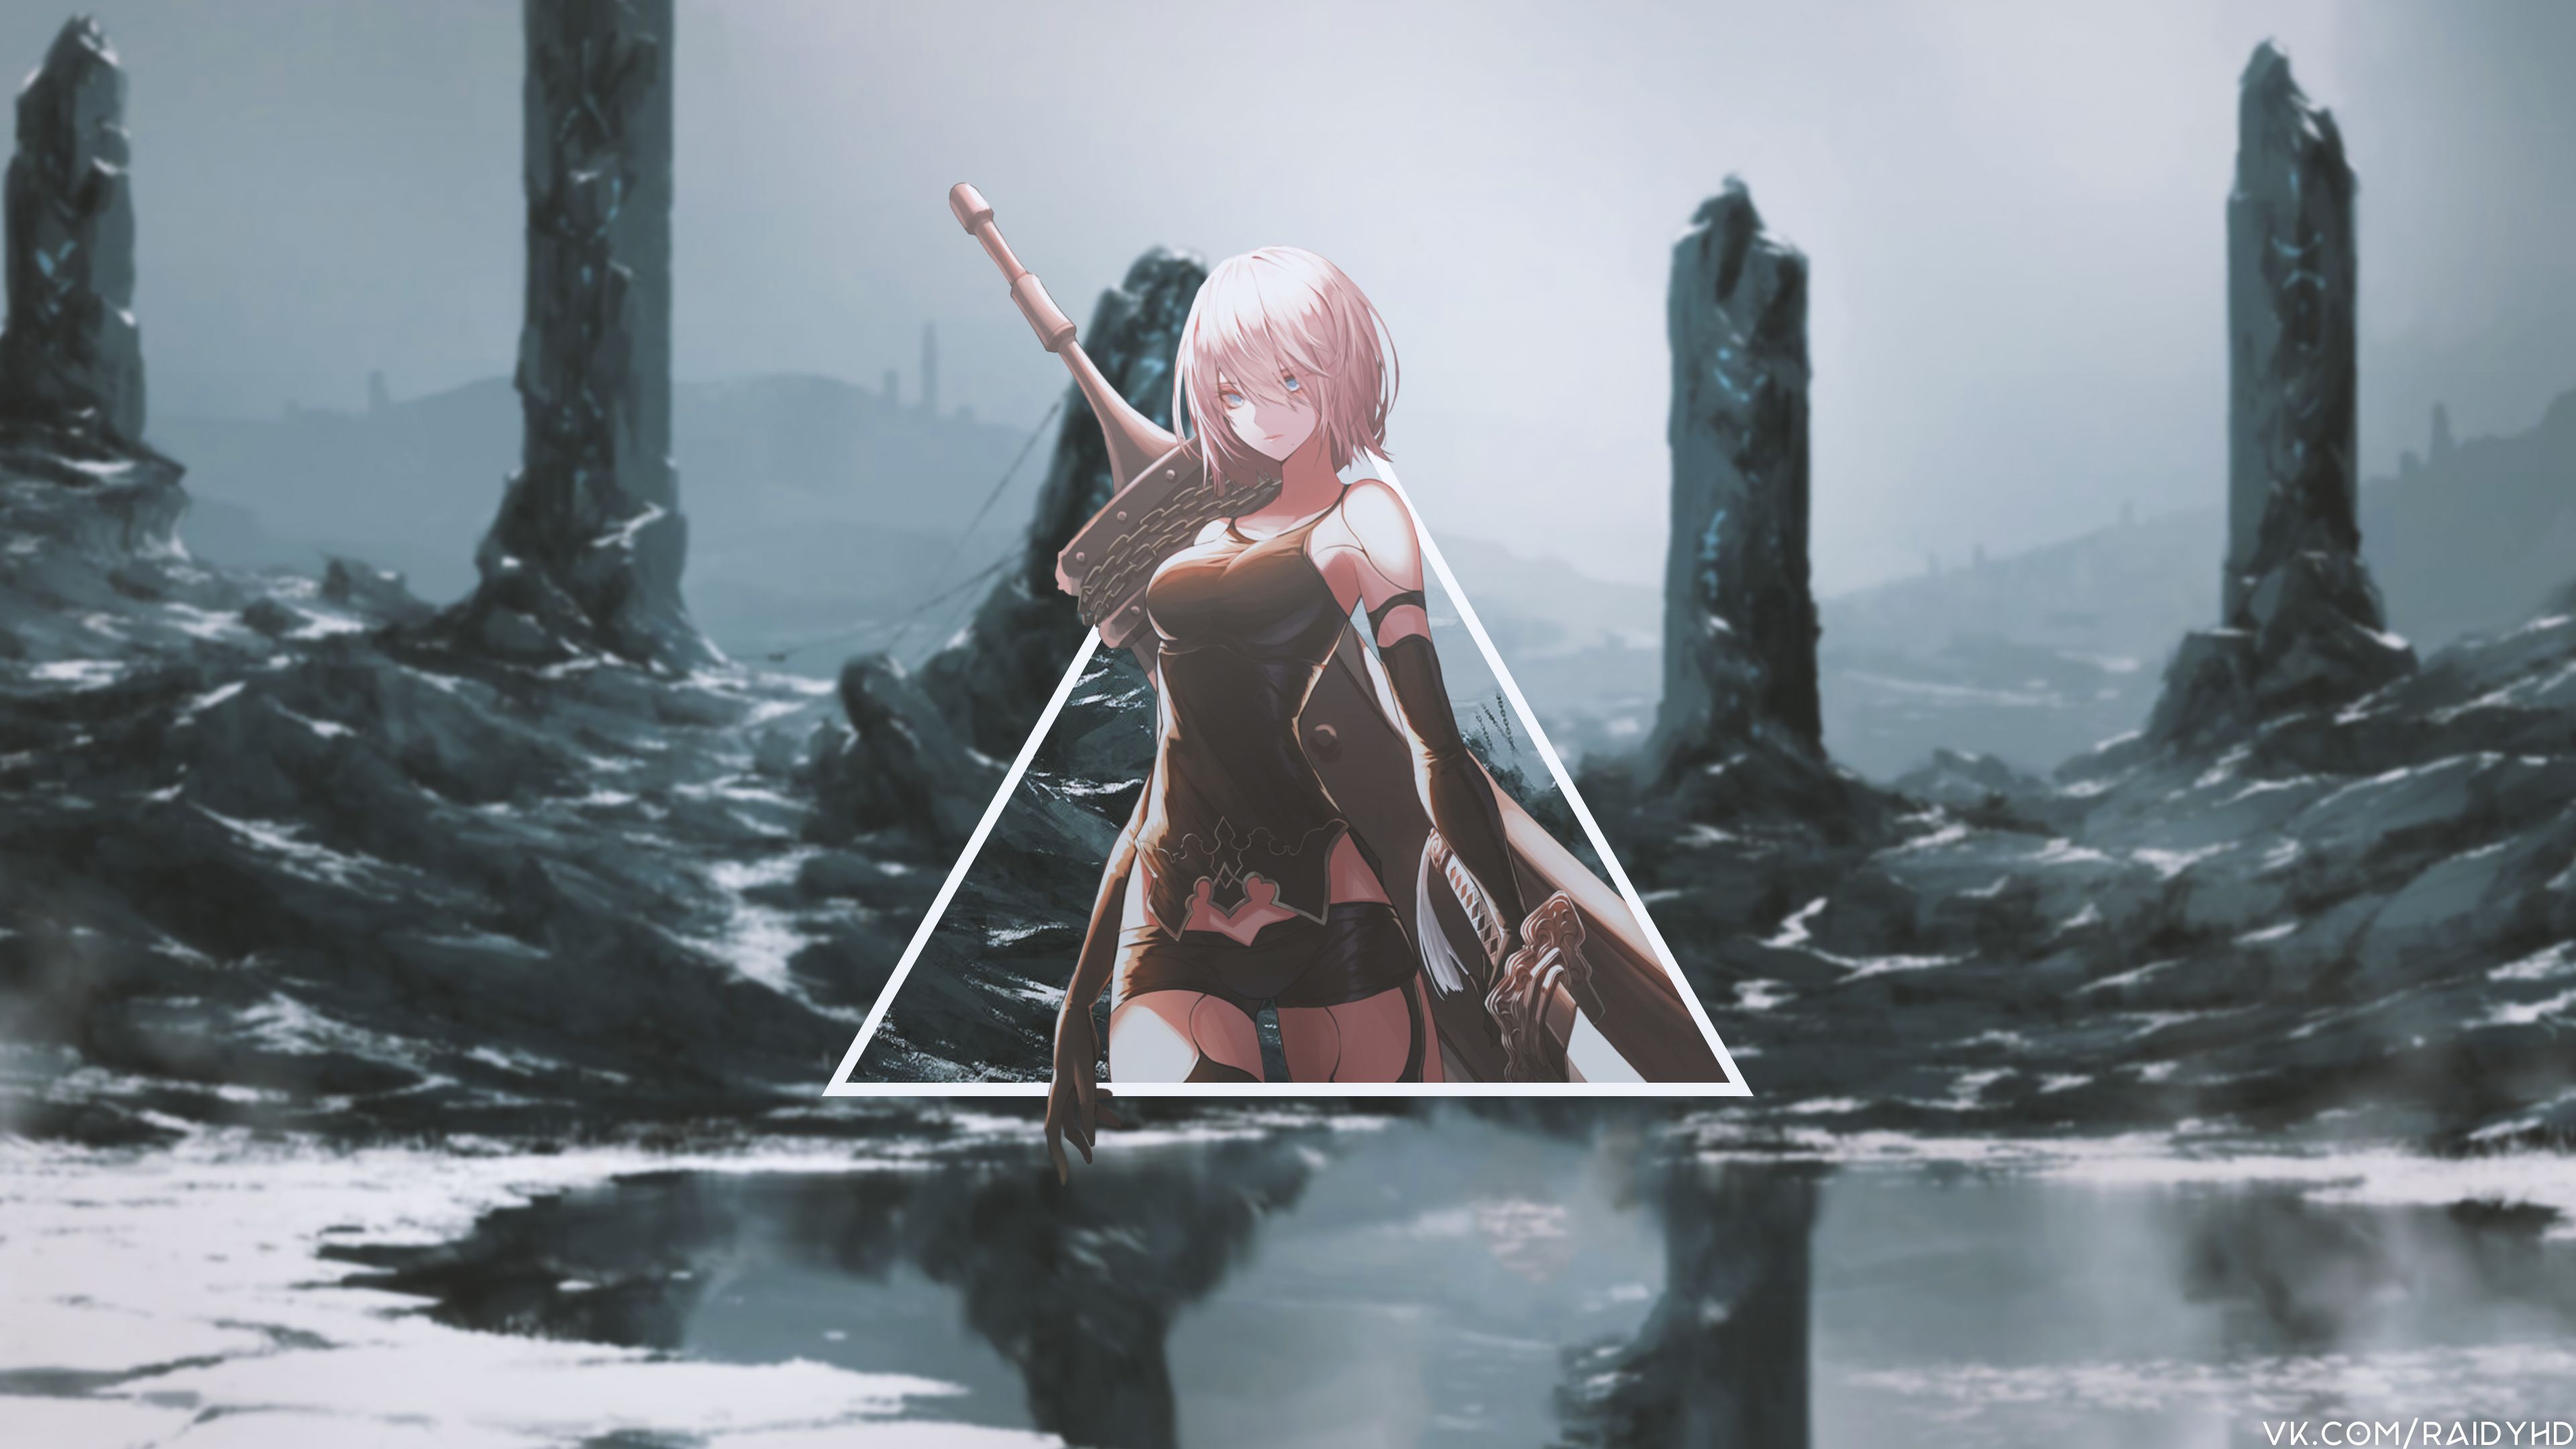 Anime 3840x2160 anime girls anime picture-in-picture Nier: Automata